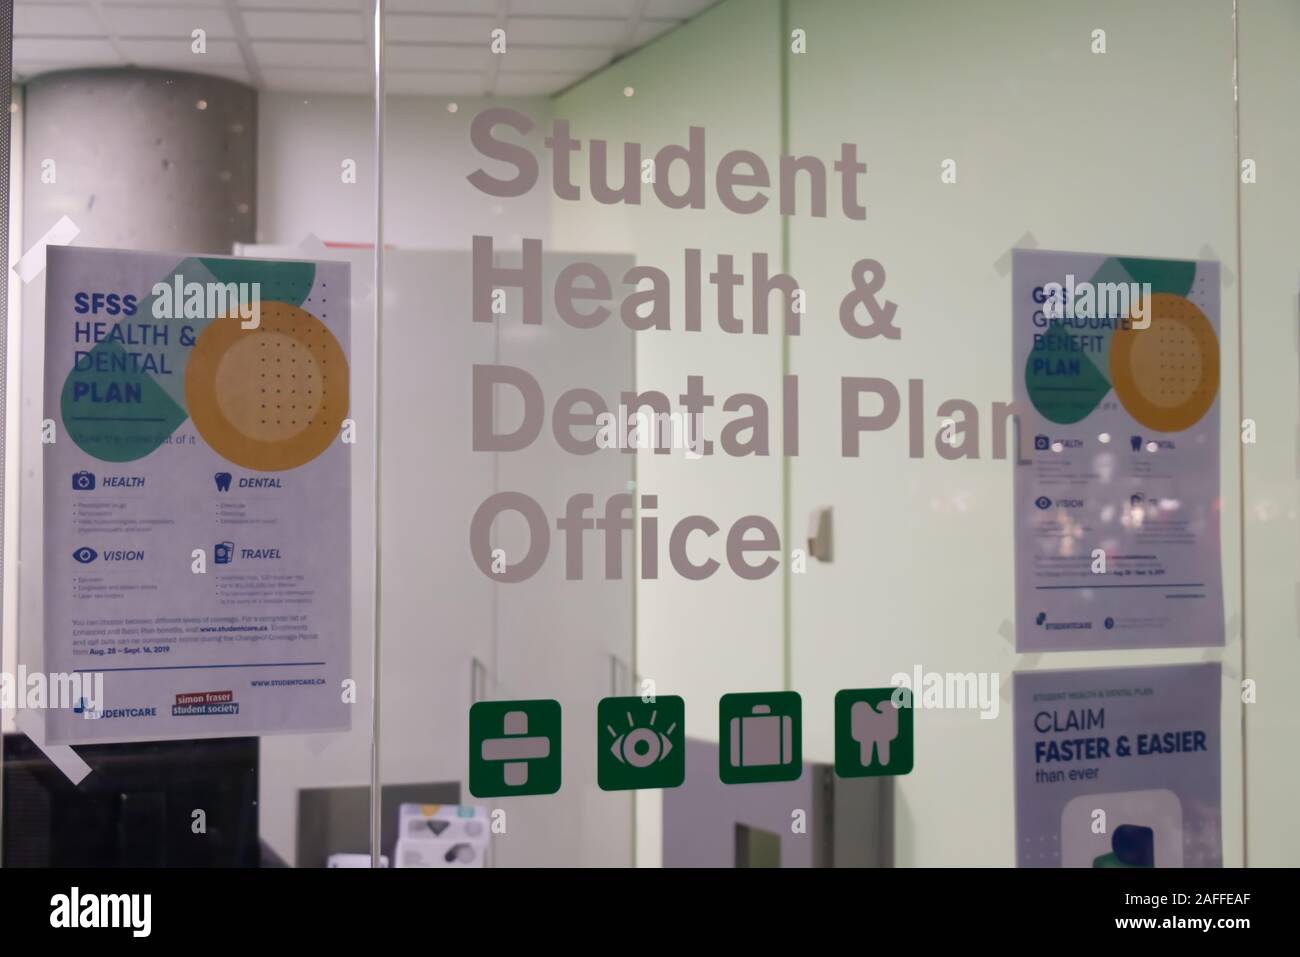 Burnaby, Canada - December 11, 2019: A View of sign 'Student Health and Dental Plan Office' at Simon Fraser University Campus Stock Photo